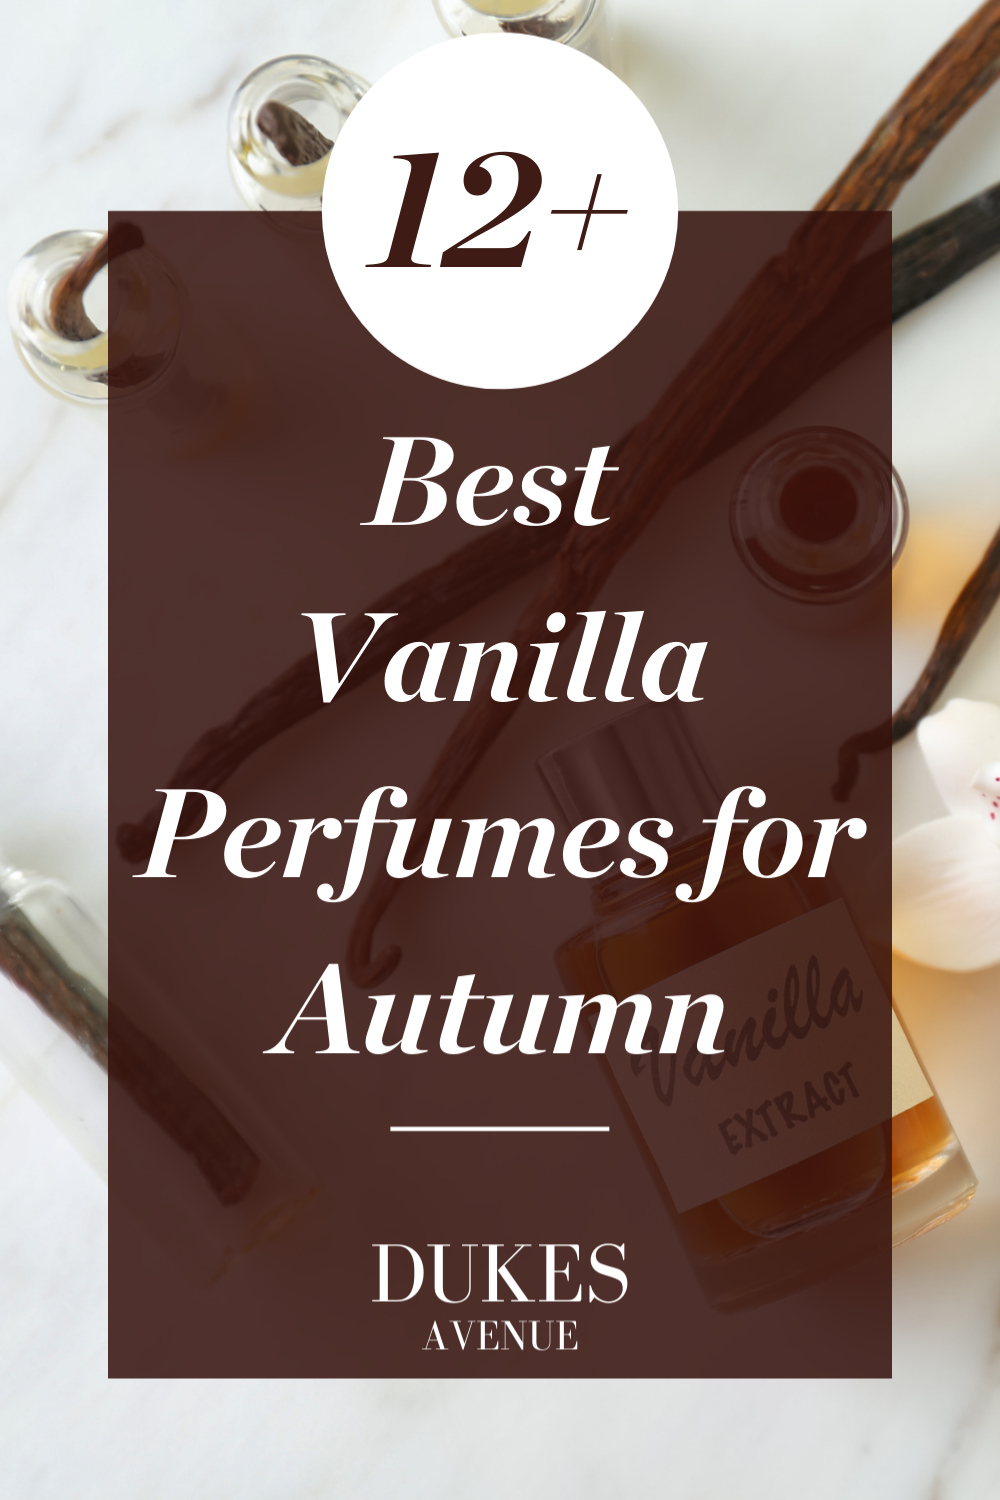 A picture of a bottle of vanilla essence and a vanilla flower, with text overlay 'best vanilla perfumes for autumn'